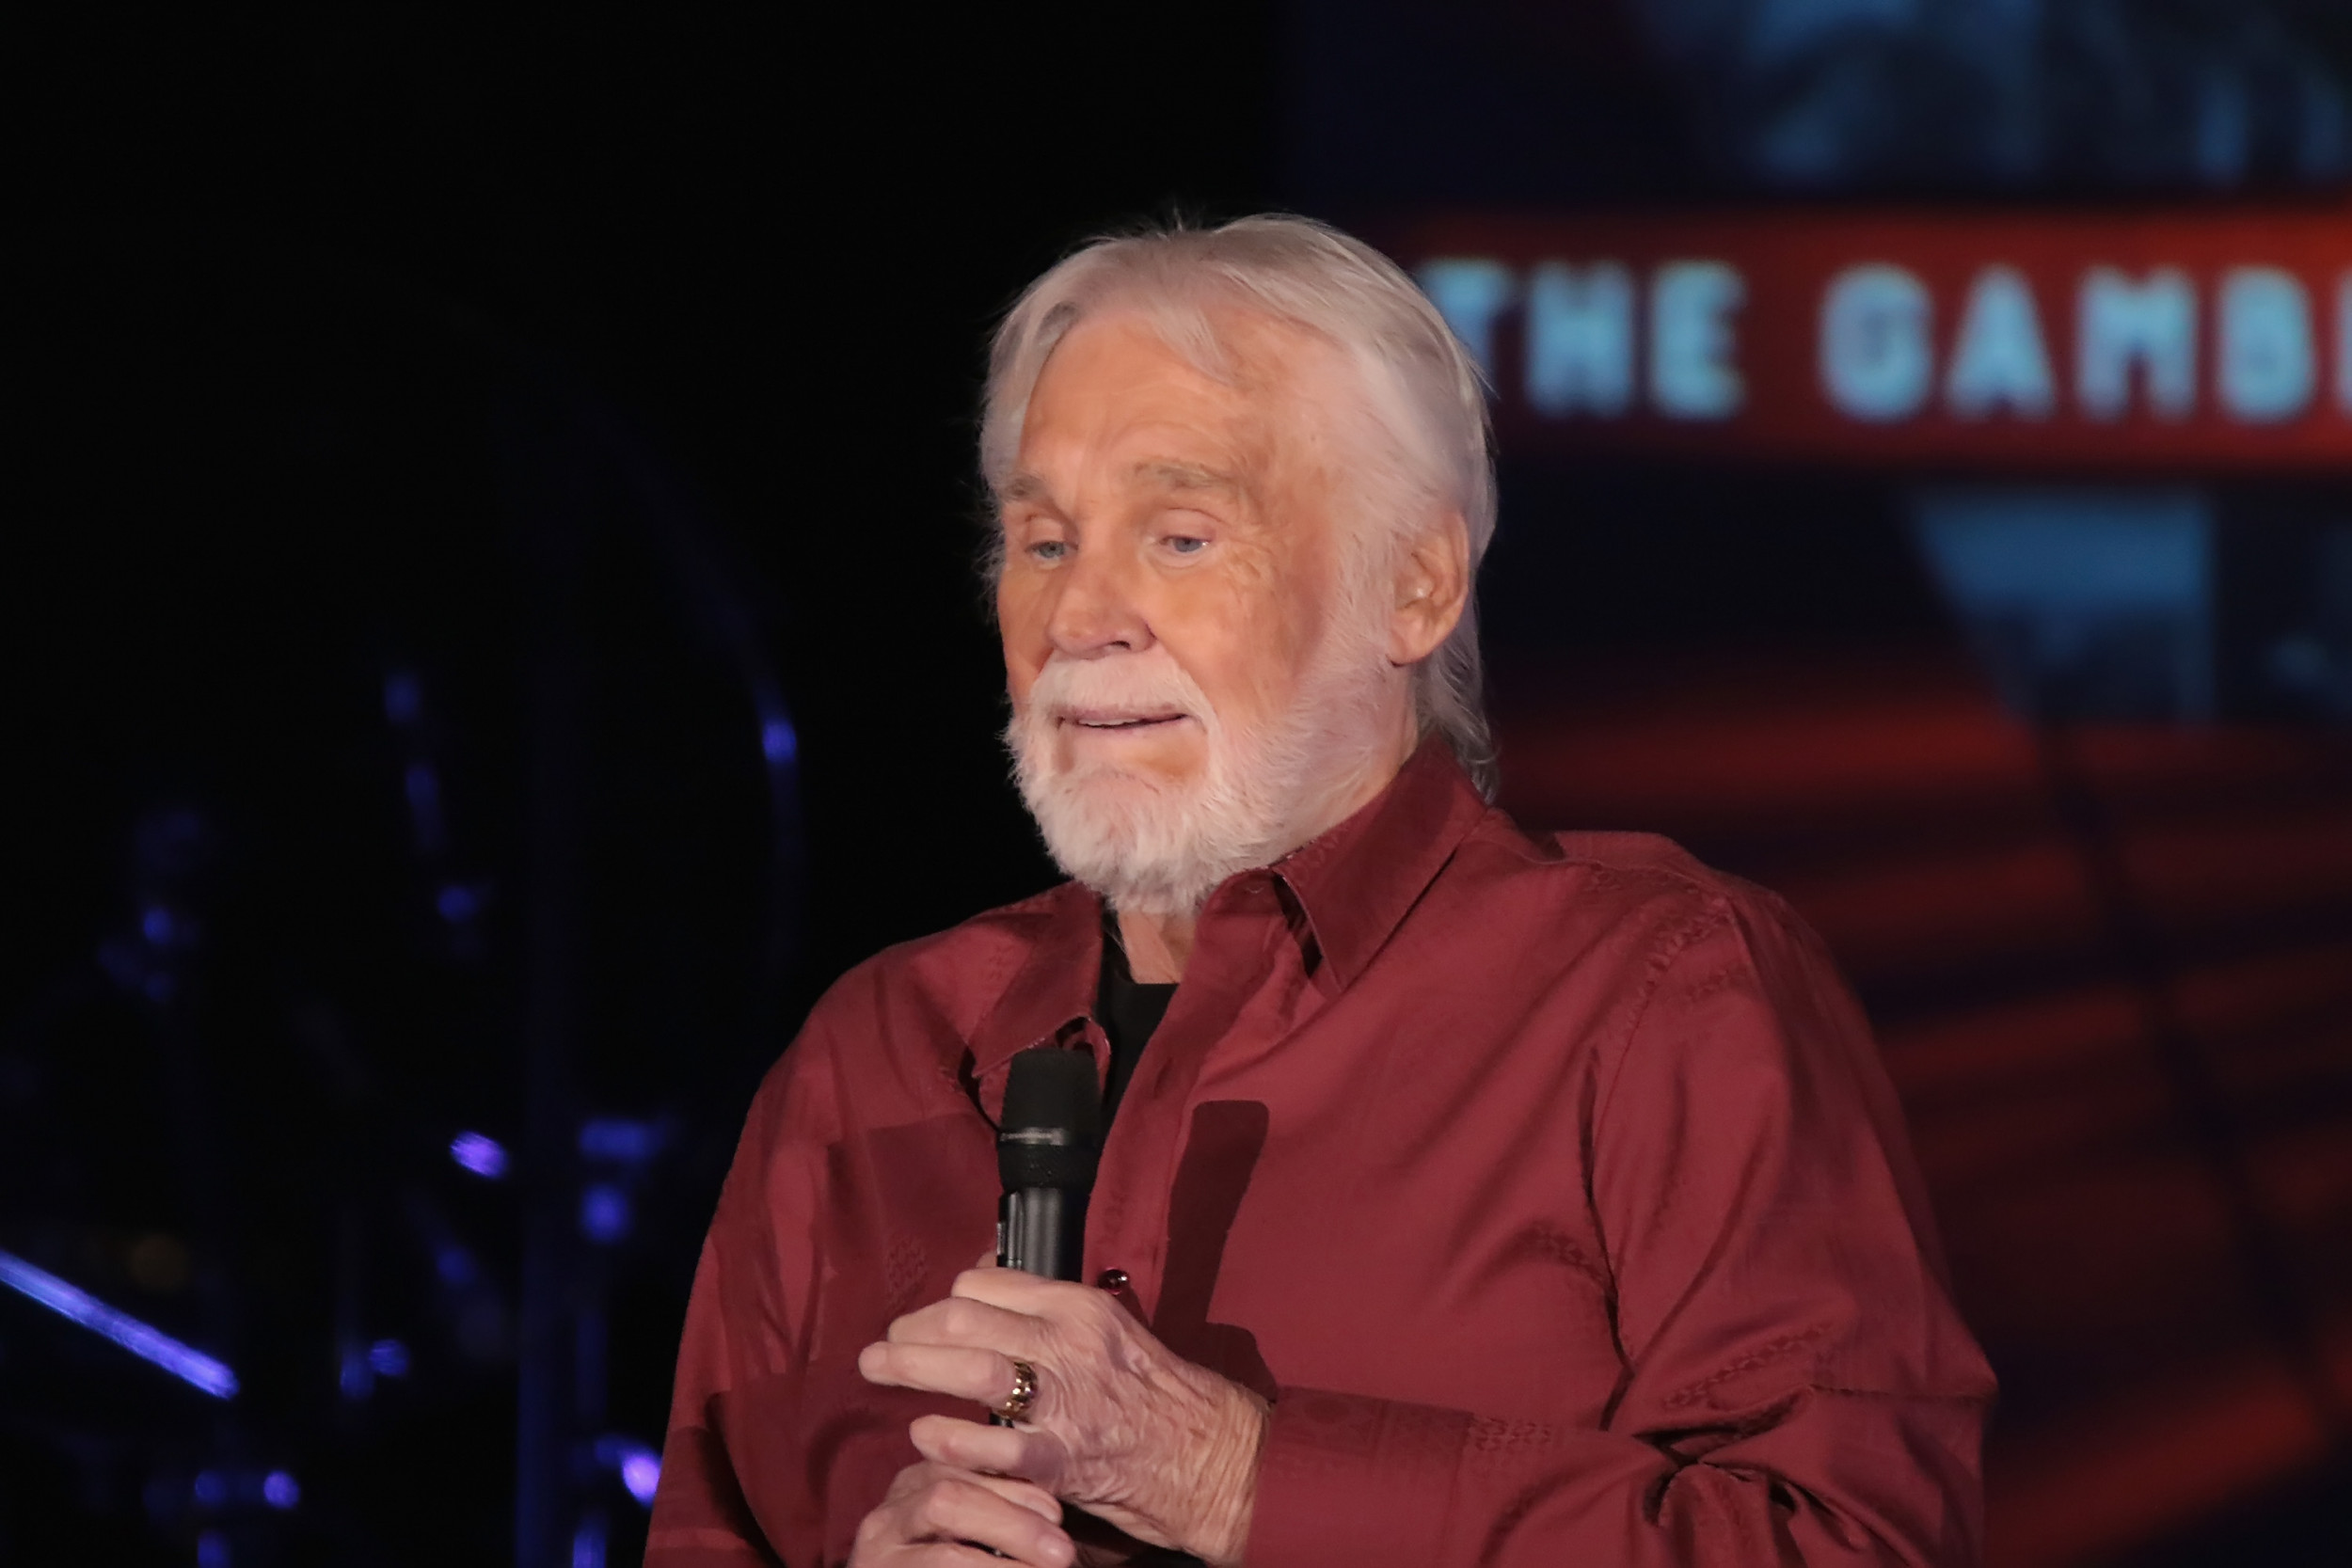 5-songs-to-remember-legendary-country-singer-kenny-rogers-by